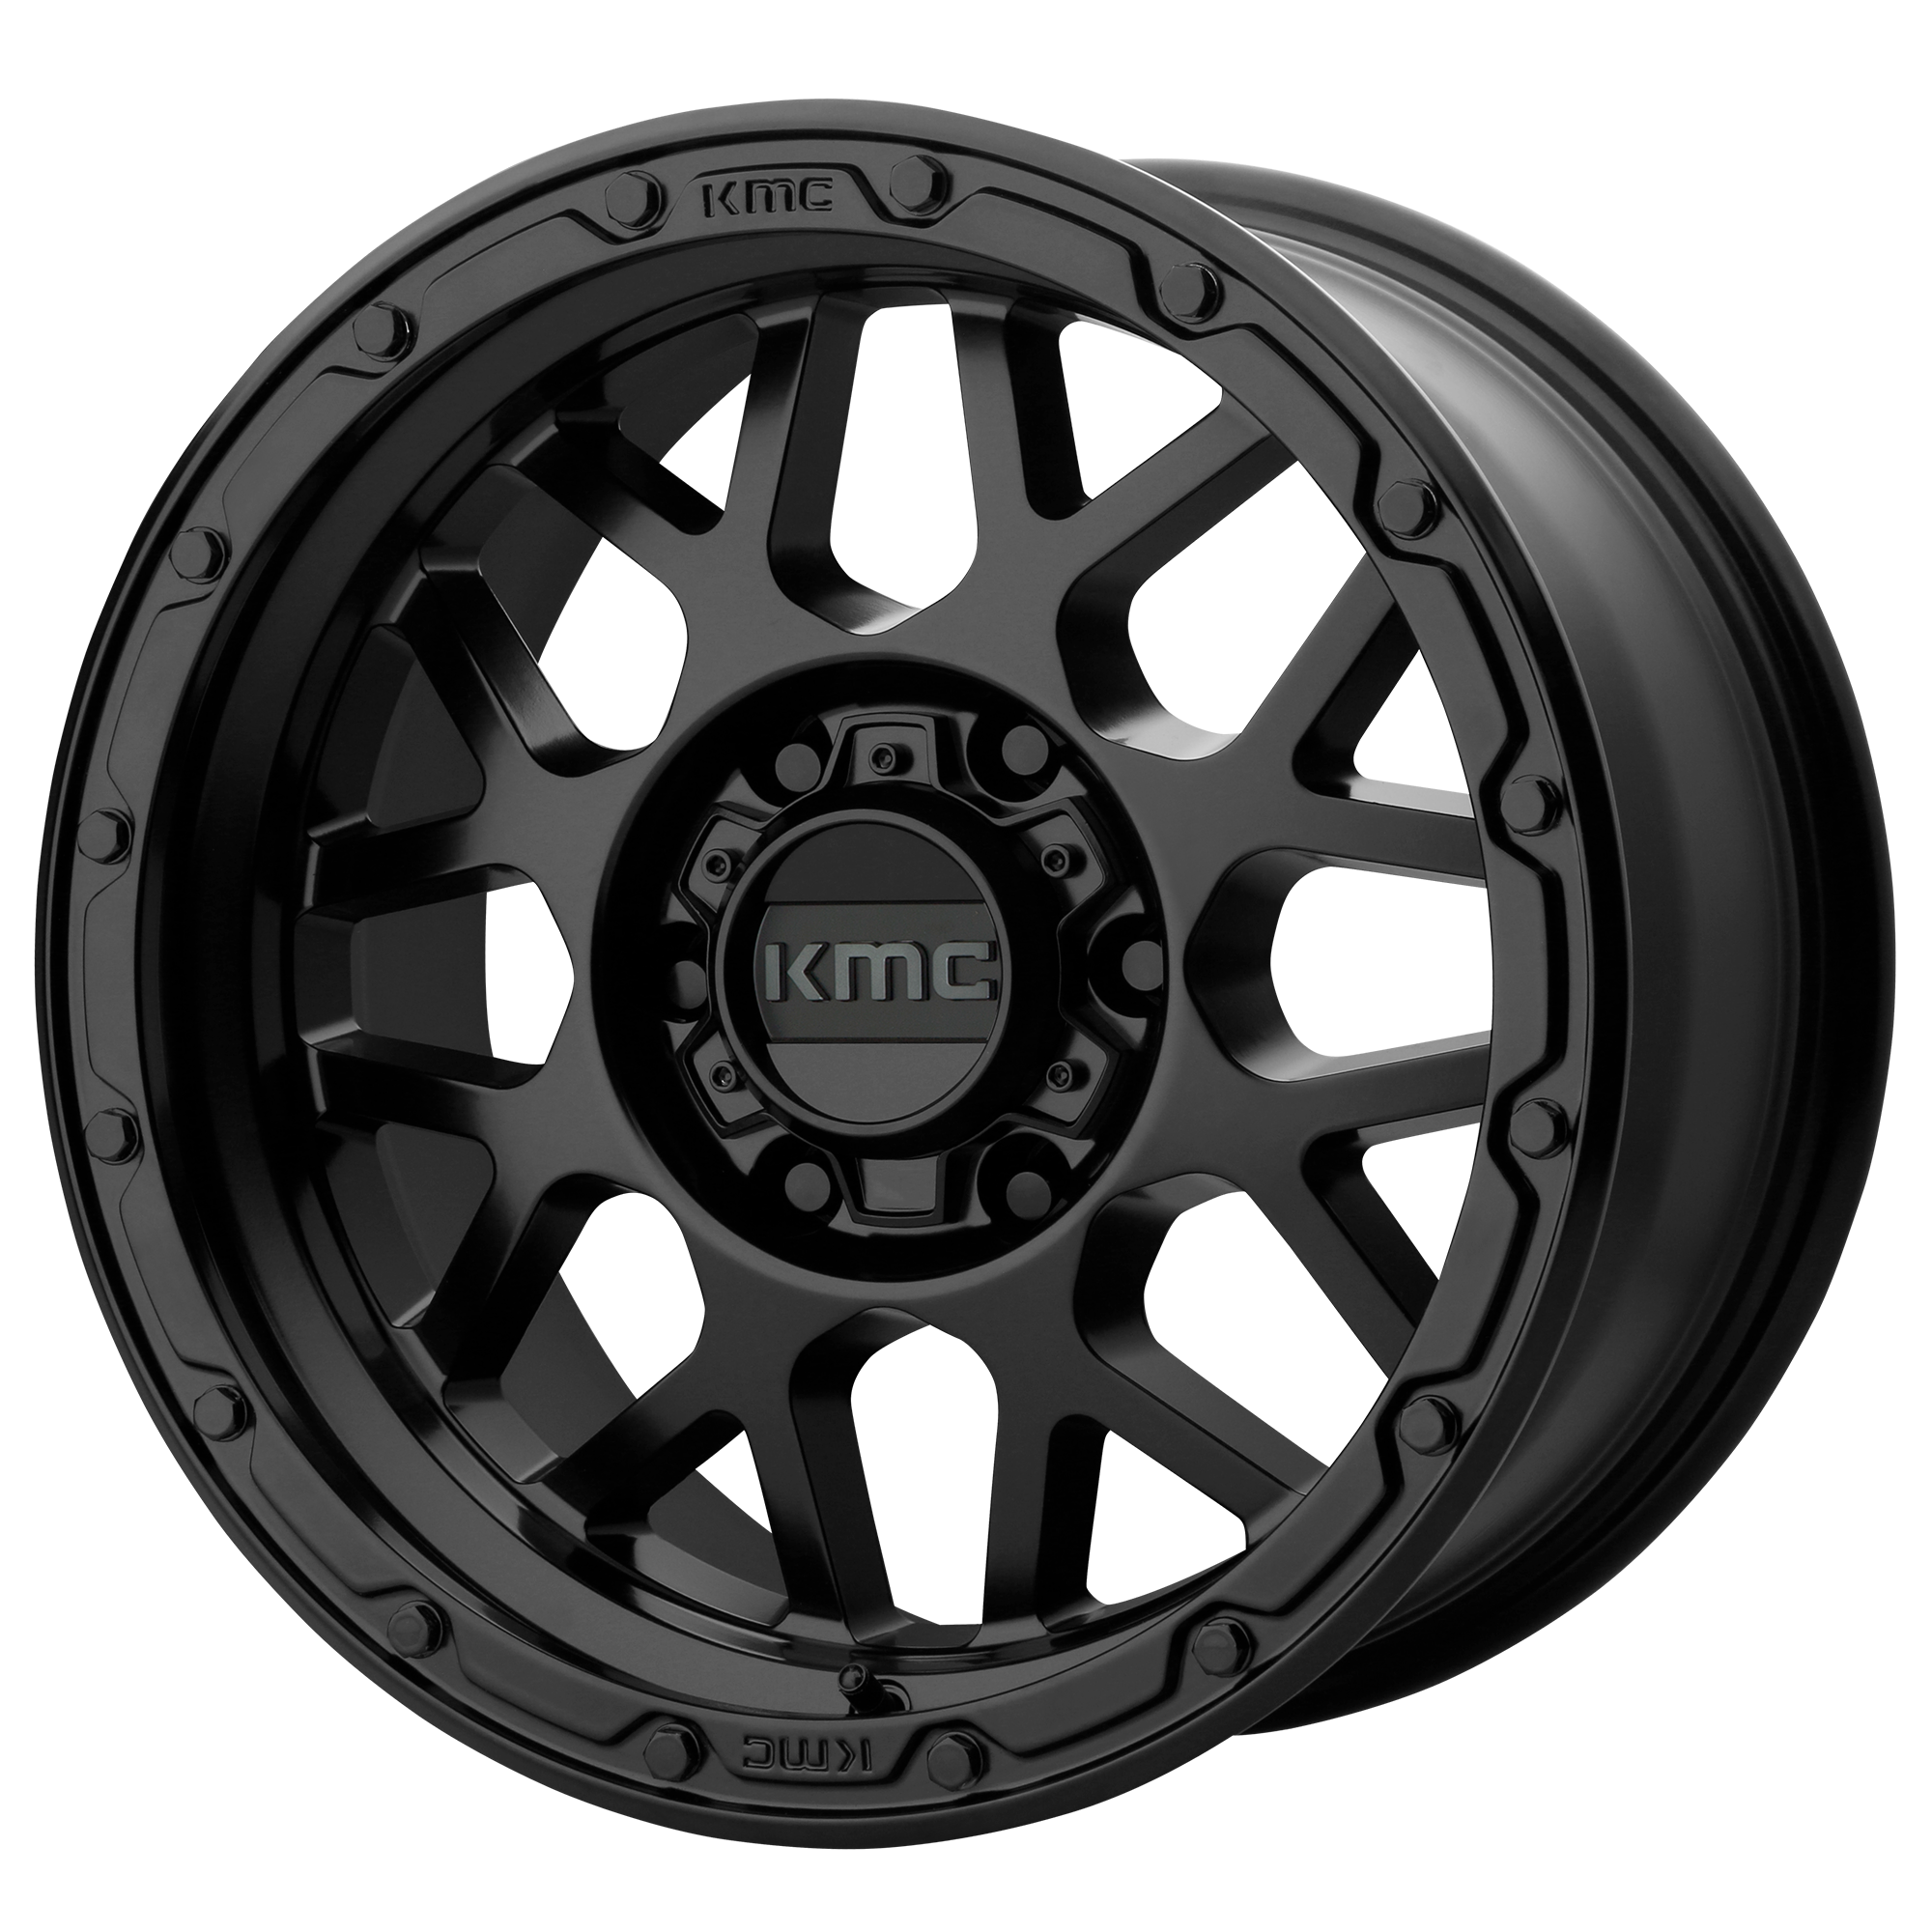 GRENADE OFF-ROAD 17x9 6x120.00 MATTE BLACK (18 mm) - Tires and Engine Performance